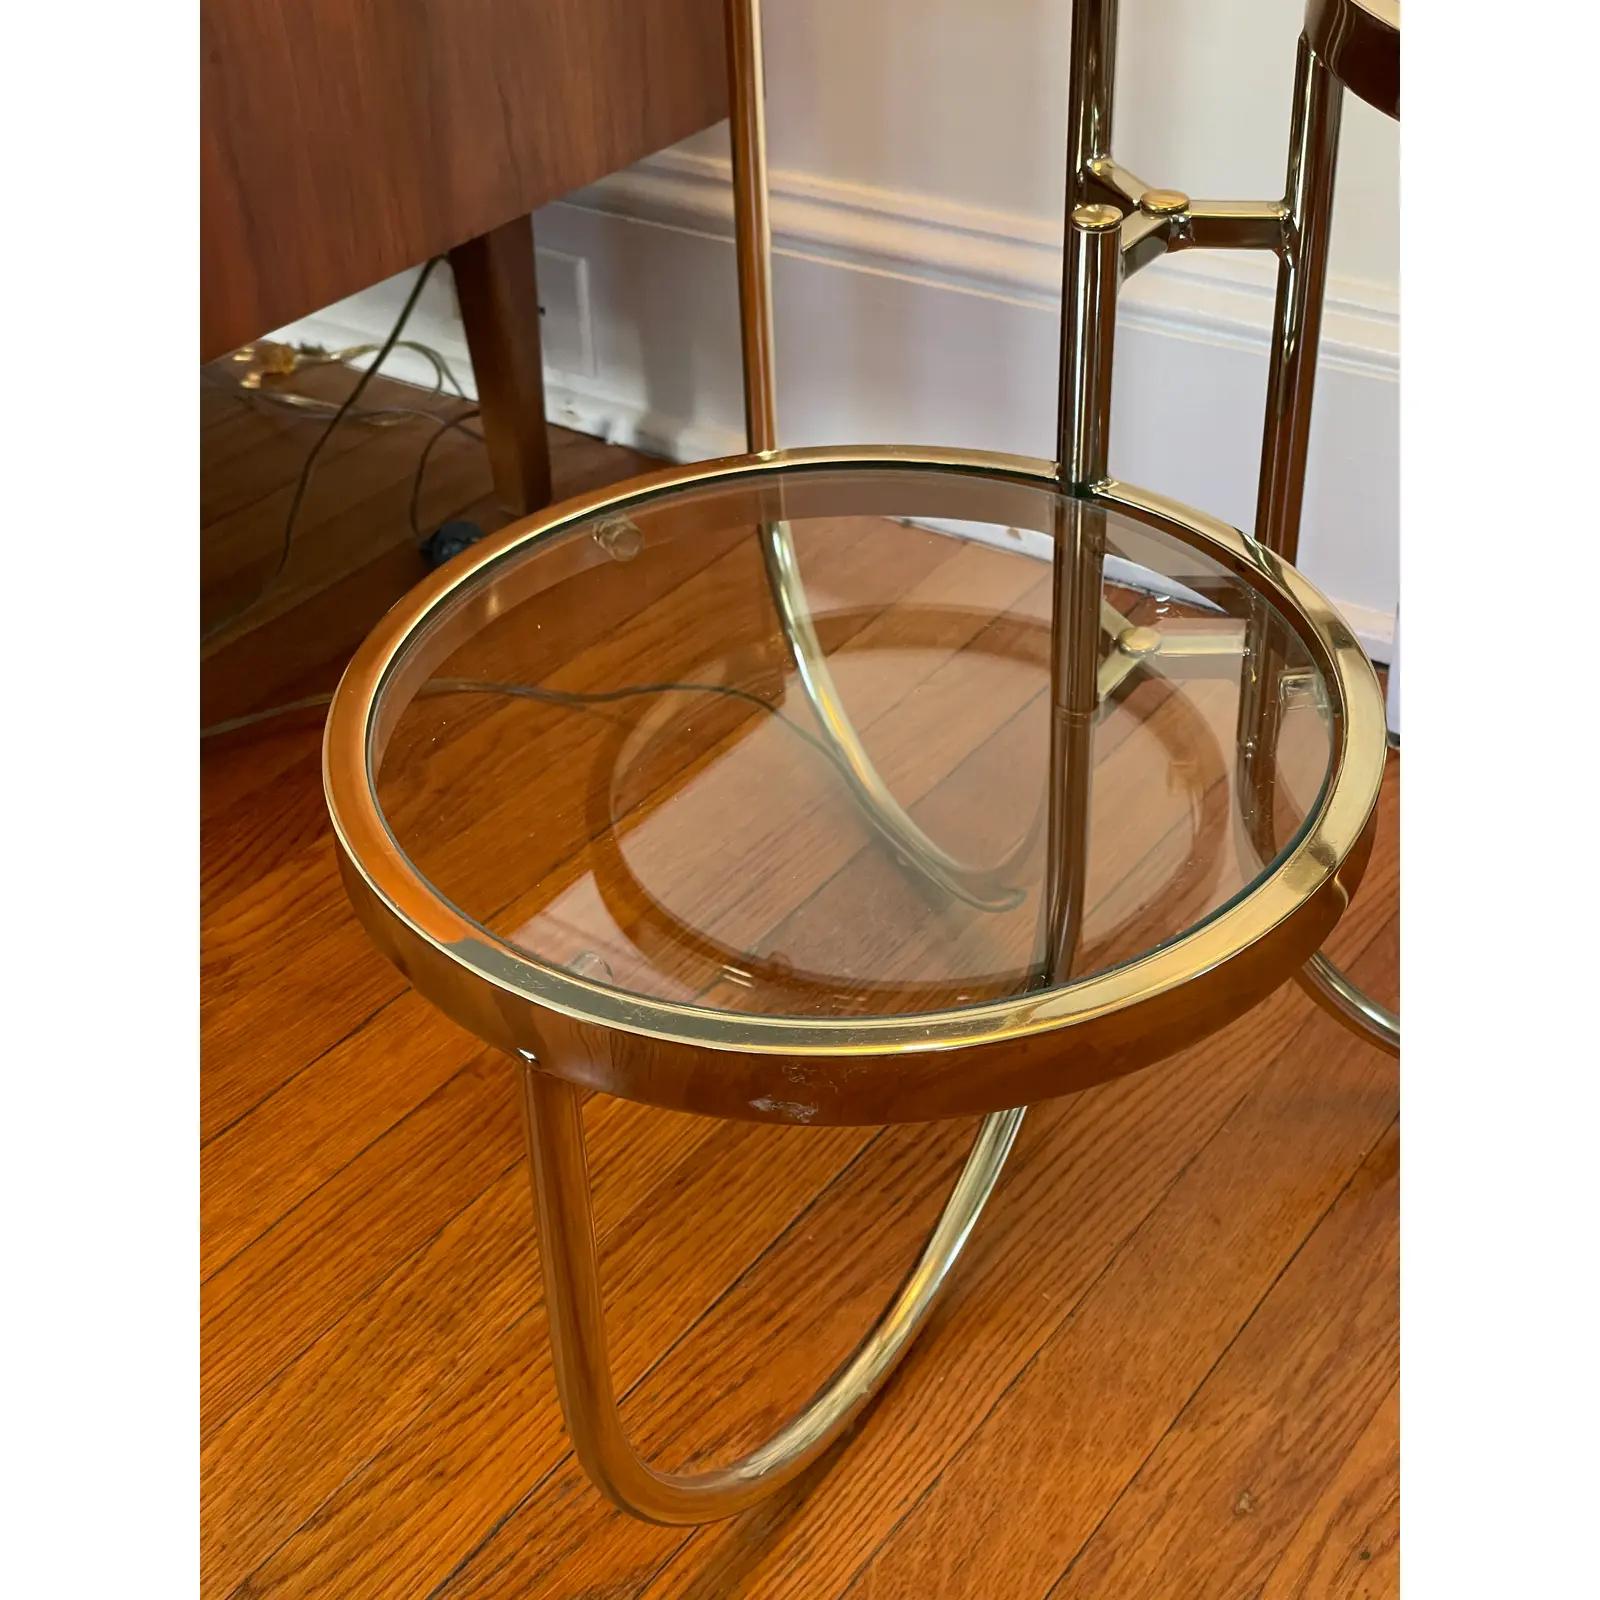 Vintage Mid Century Brass Floor Lamp With Three Circular Built-In Stand Tables For Sale 2